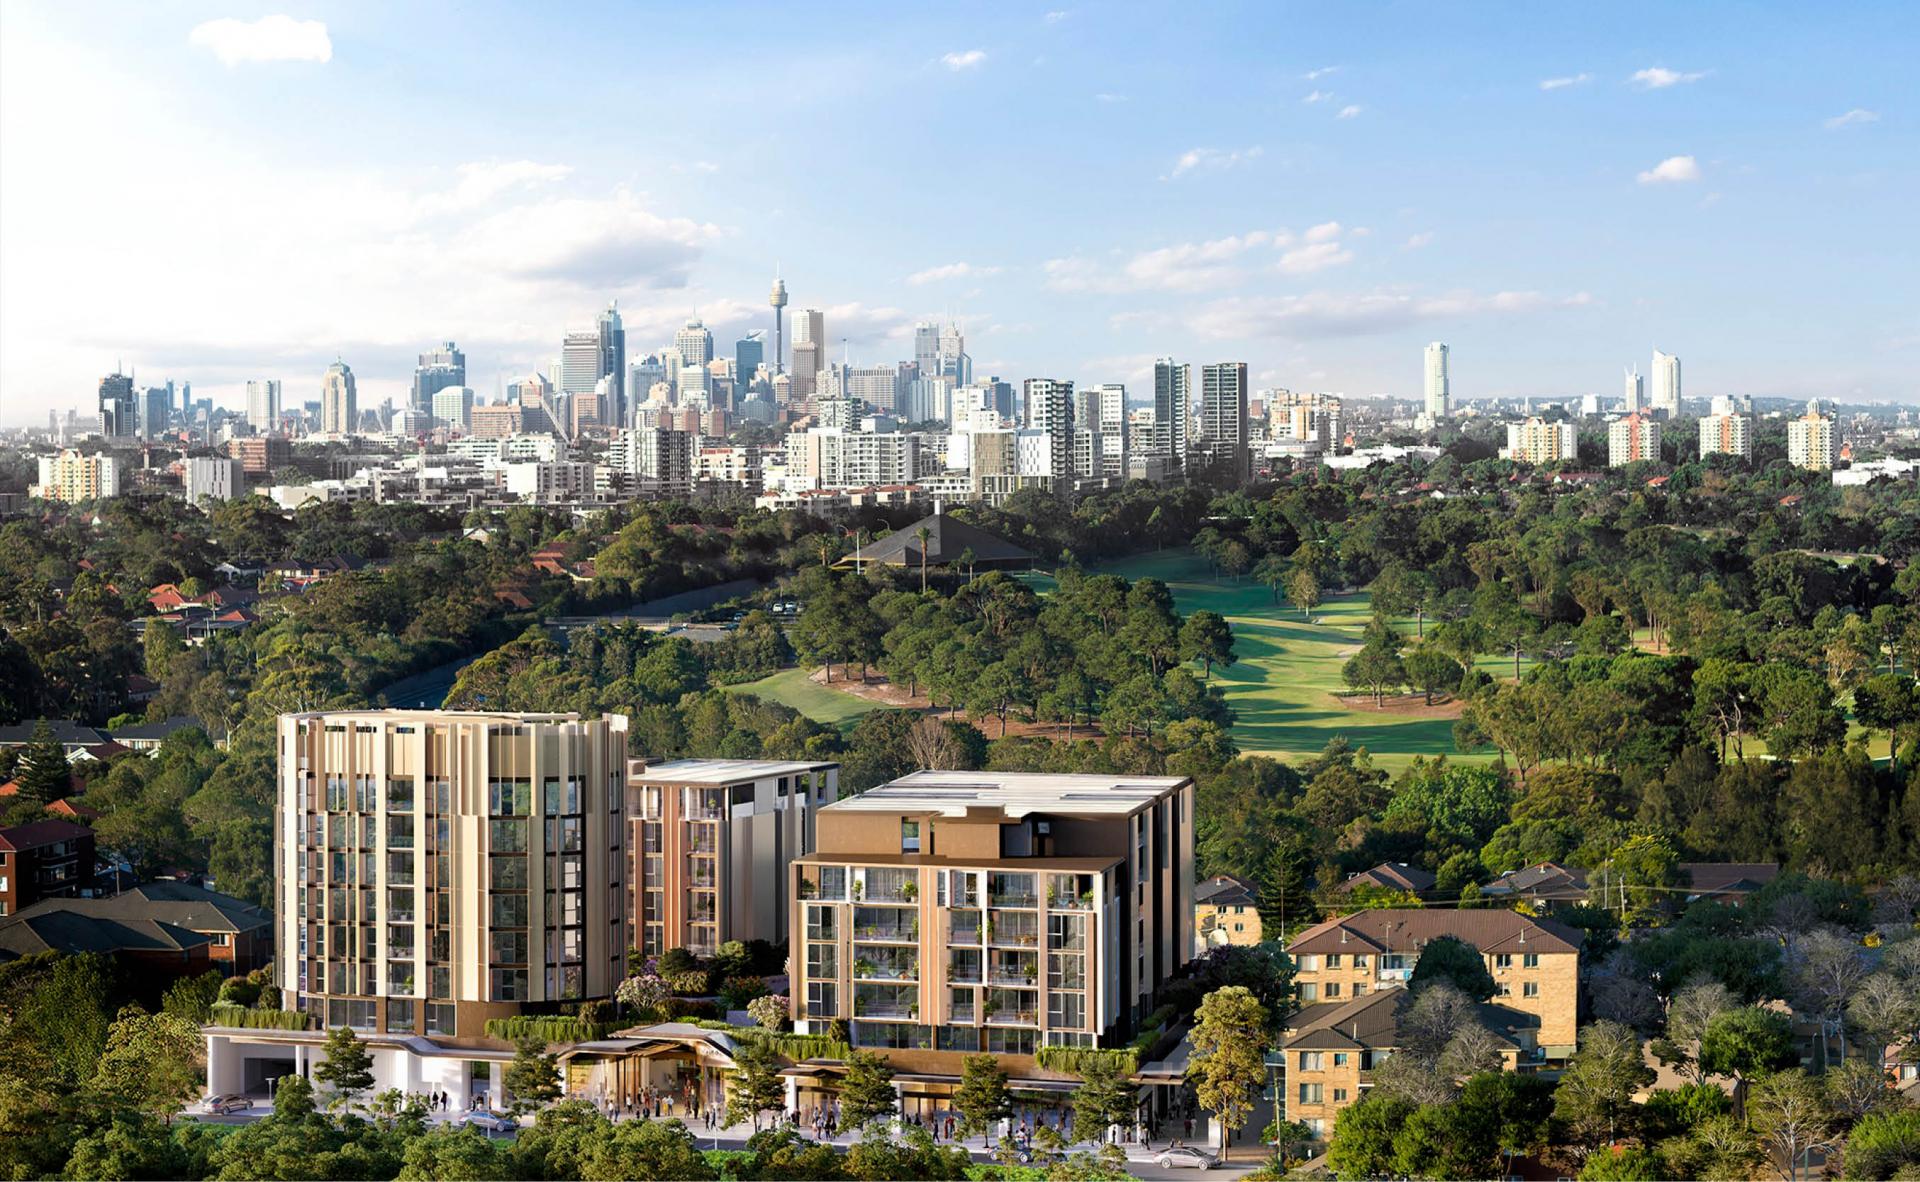 Golf Lovers Cannot Miss This Brand New Residential Community in Sydney